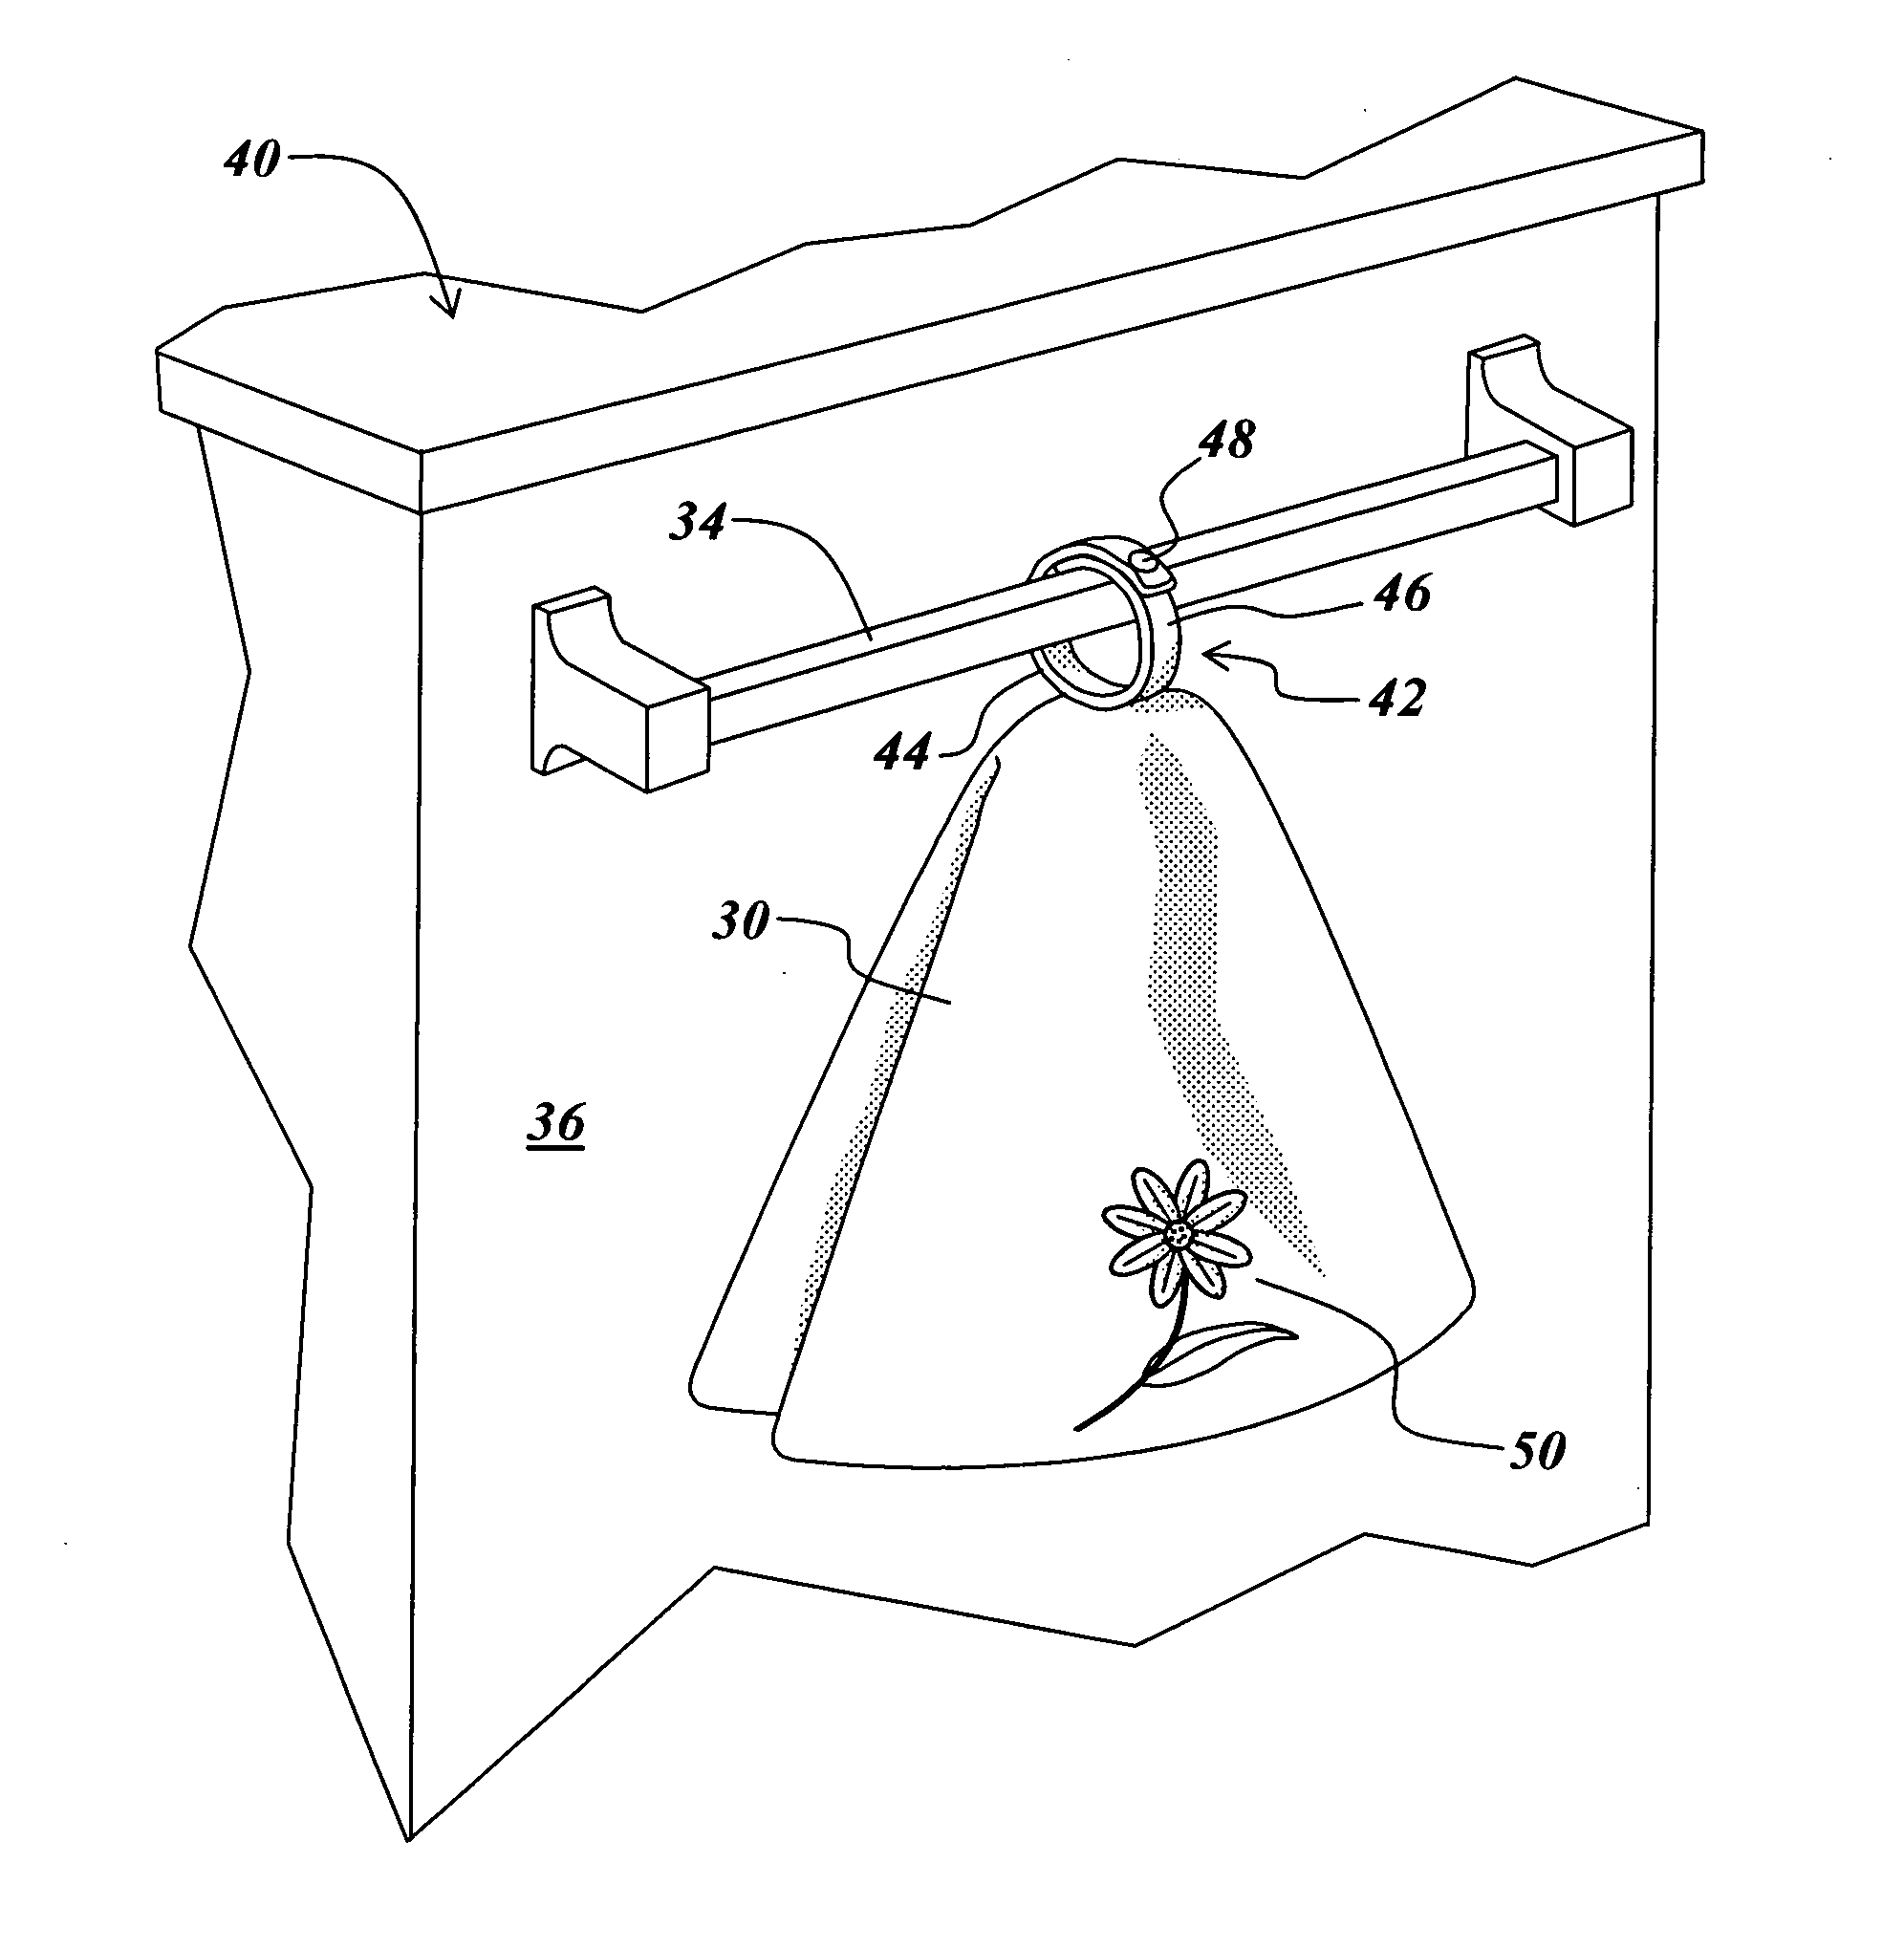 Method and apparatus for releasably attaching a towel to a close-ended rod